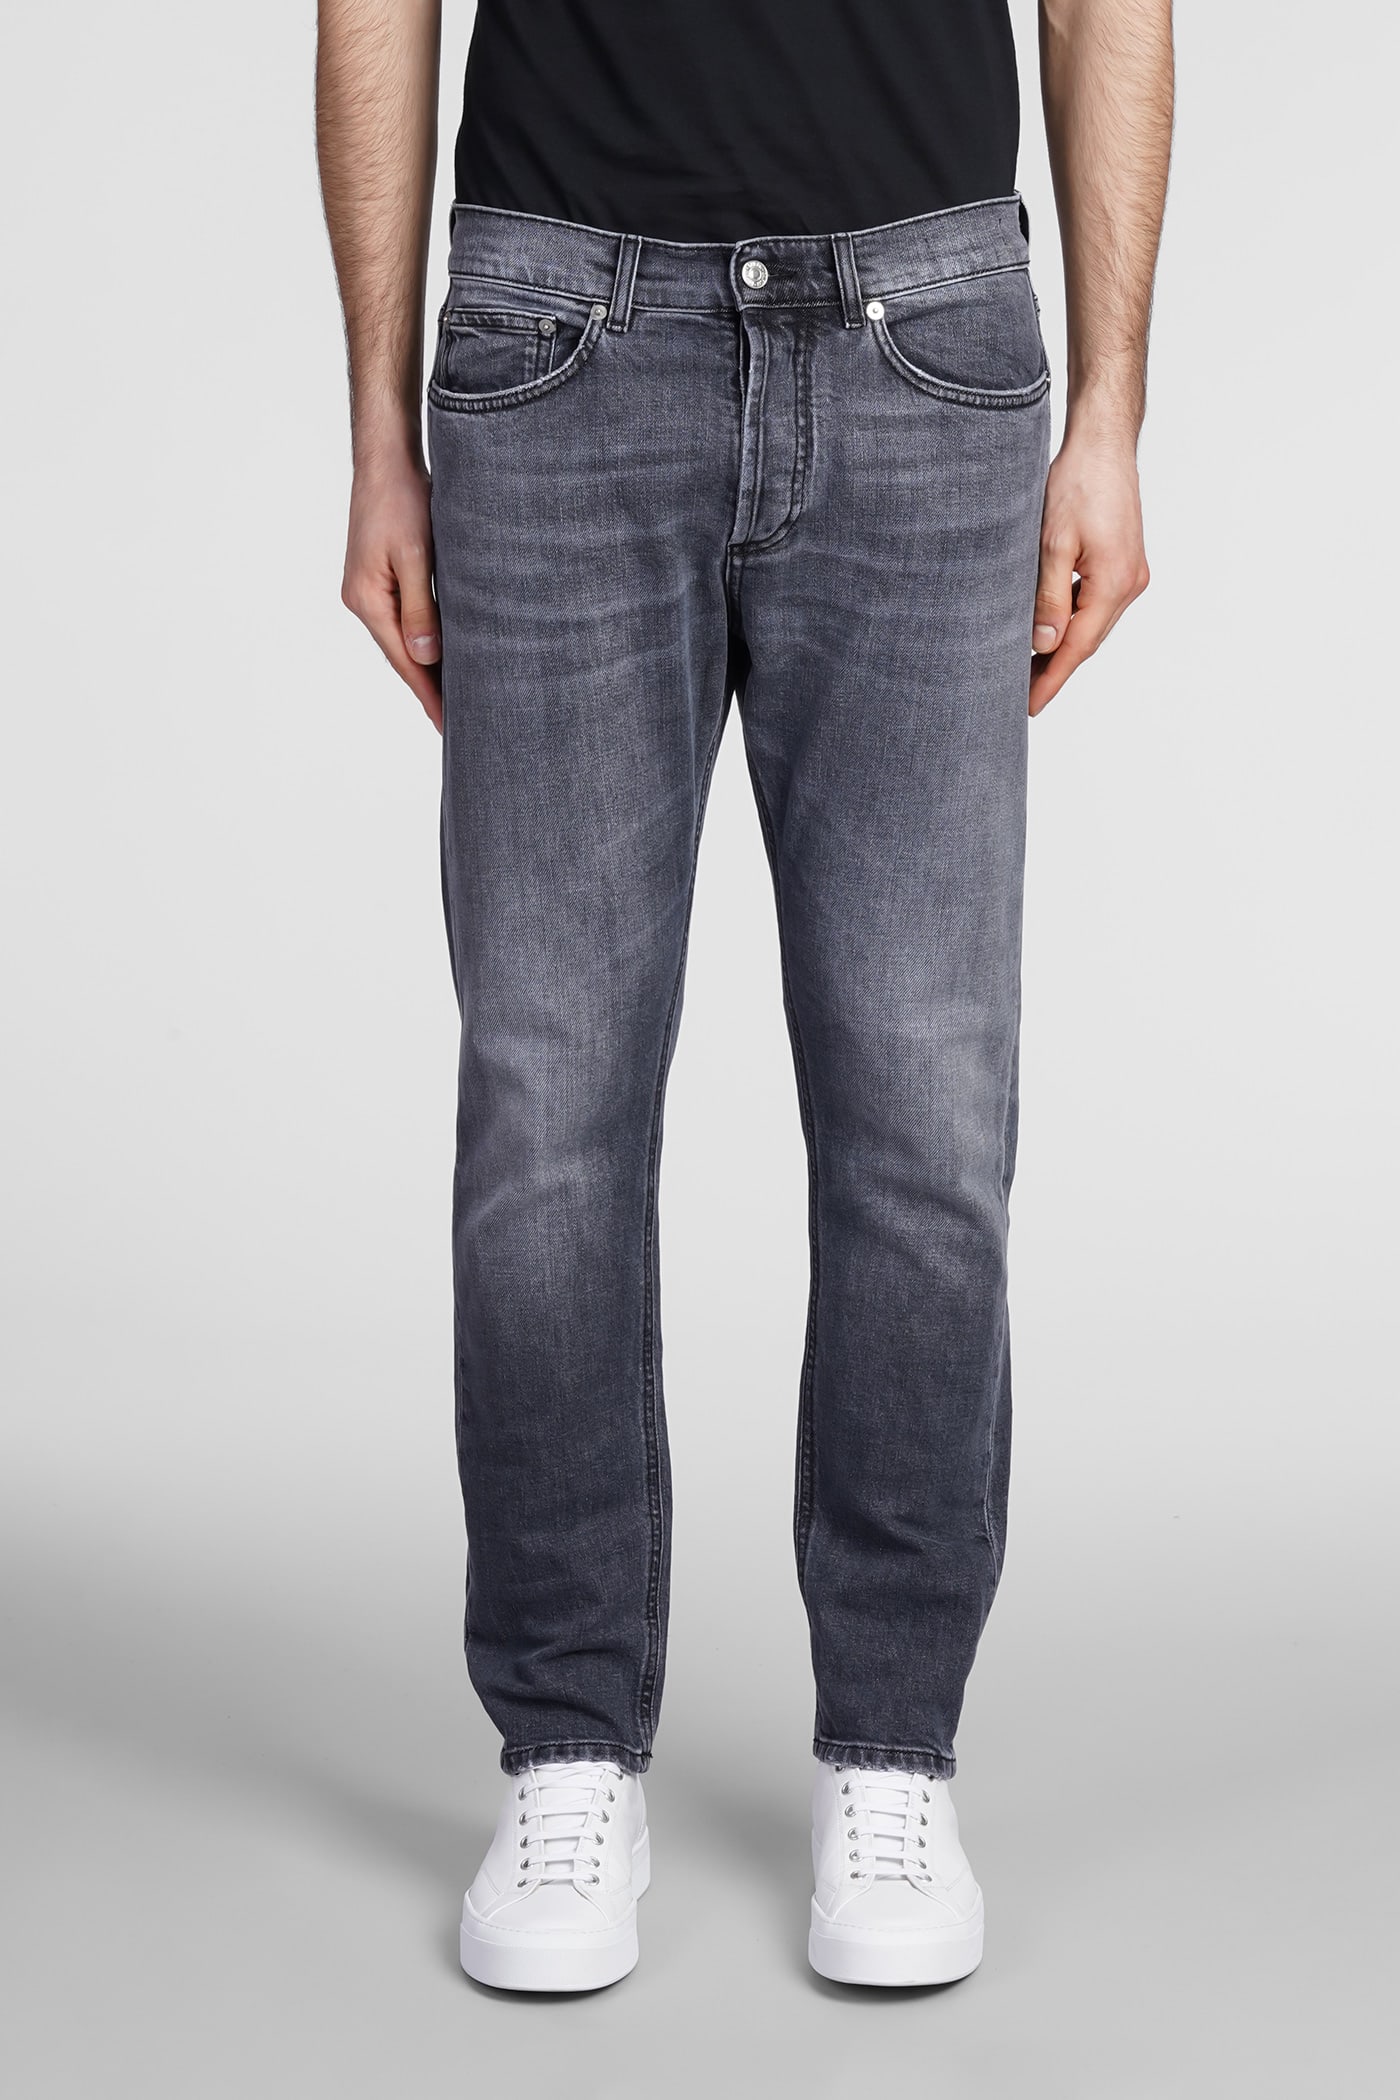 MAURO GRIFONI JEANS IN GREY COTTON